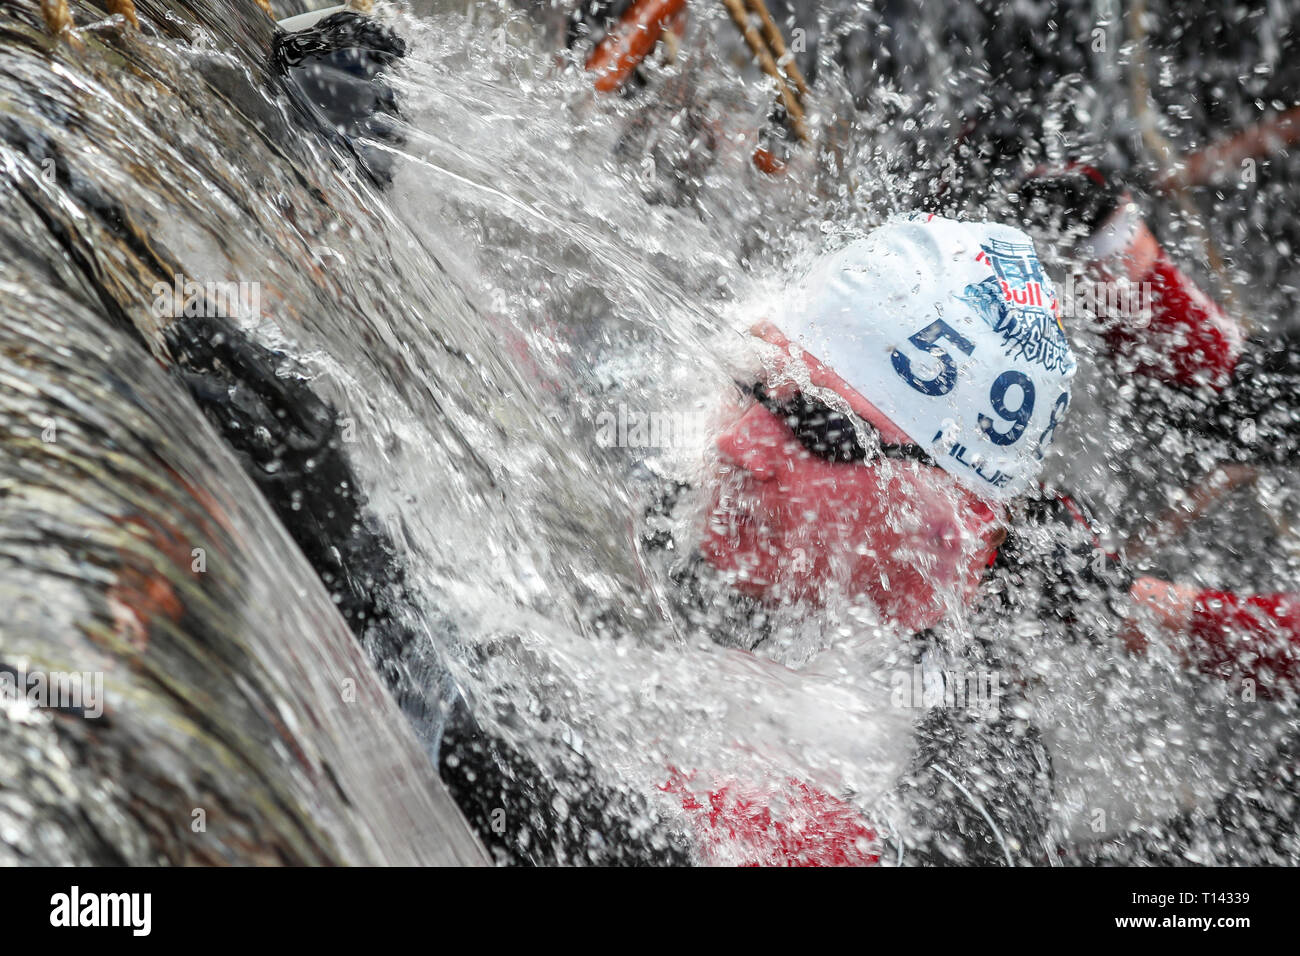 Glasgow, Scotland, UK. 23rd March, 2019. 600 hundred international competitors took part in the annual Red Bull Neptune Steps Cold Water race along 5 locks of the Clyde and Forth Canal at Maryhill, known as Neptune Steps, Glasgow, UK. Thee competitors had to swim the canal, climb ropes and specially constructed obstacle walls to complete the course in water temperatures of up to 8 degrees centigrade. Credit: Findlay/Alamy Live News Stock Photo